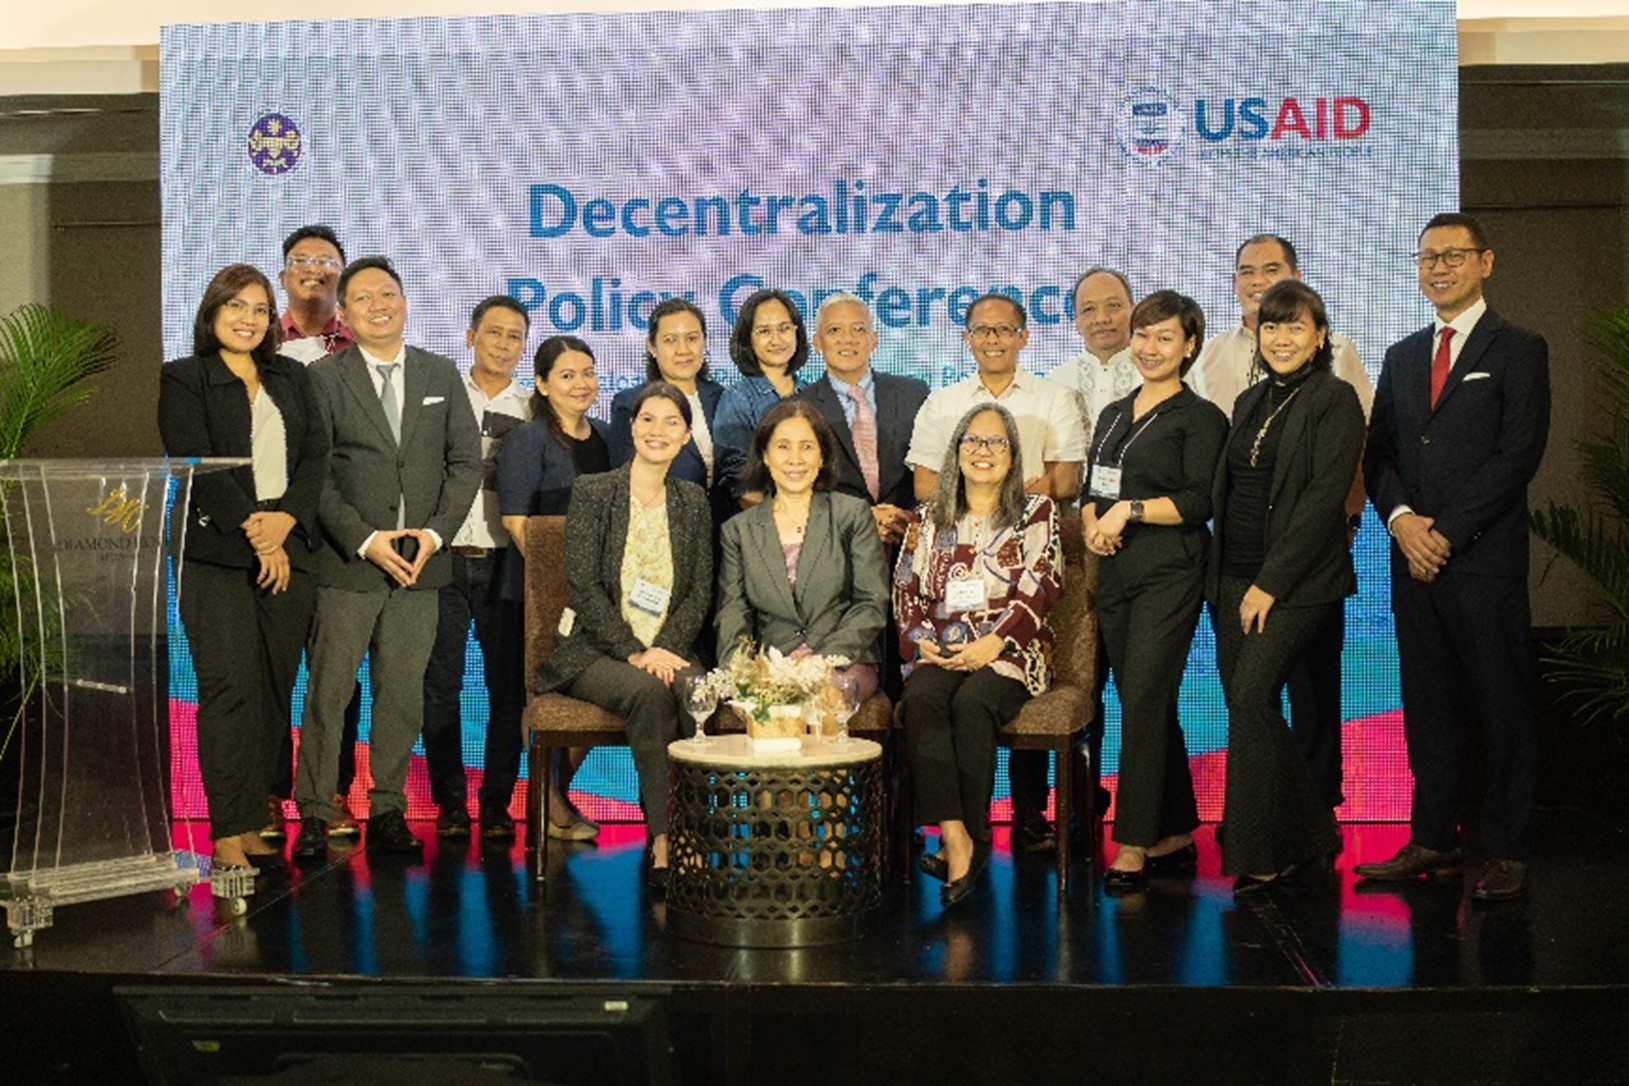 The CHANGE team during the Decentralization Policy Conference